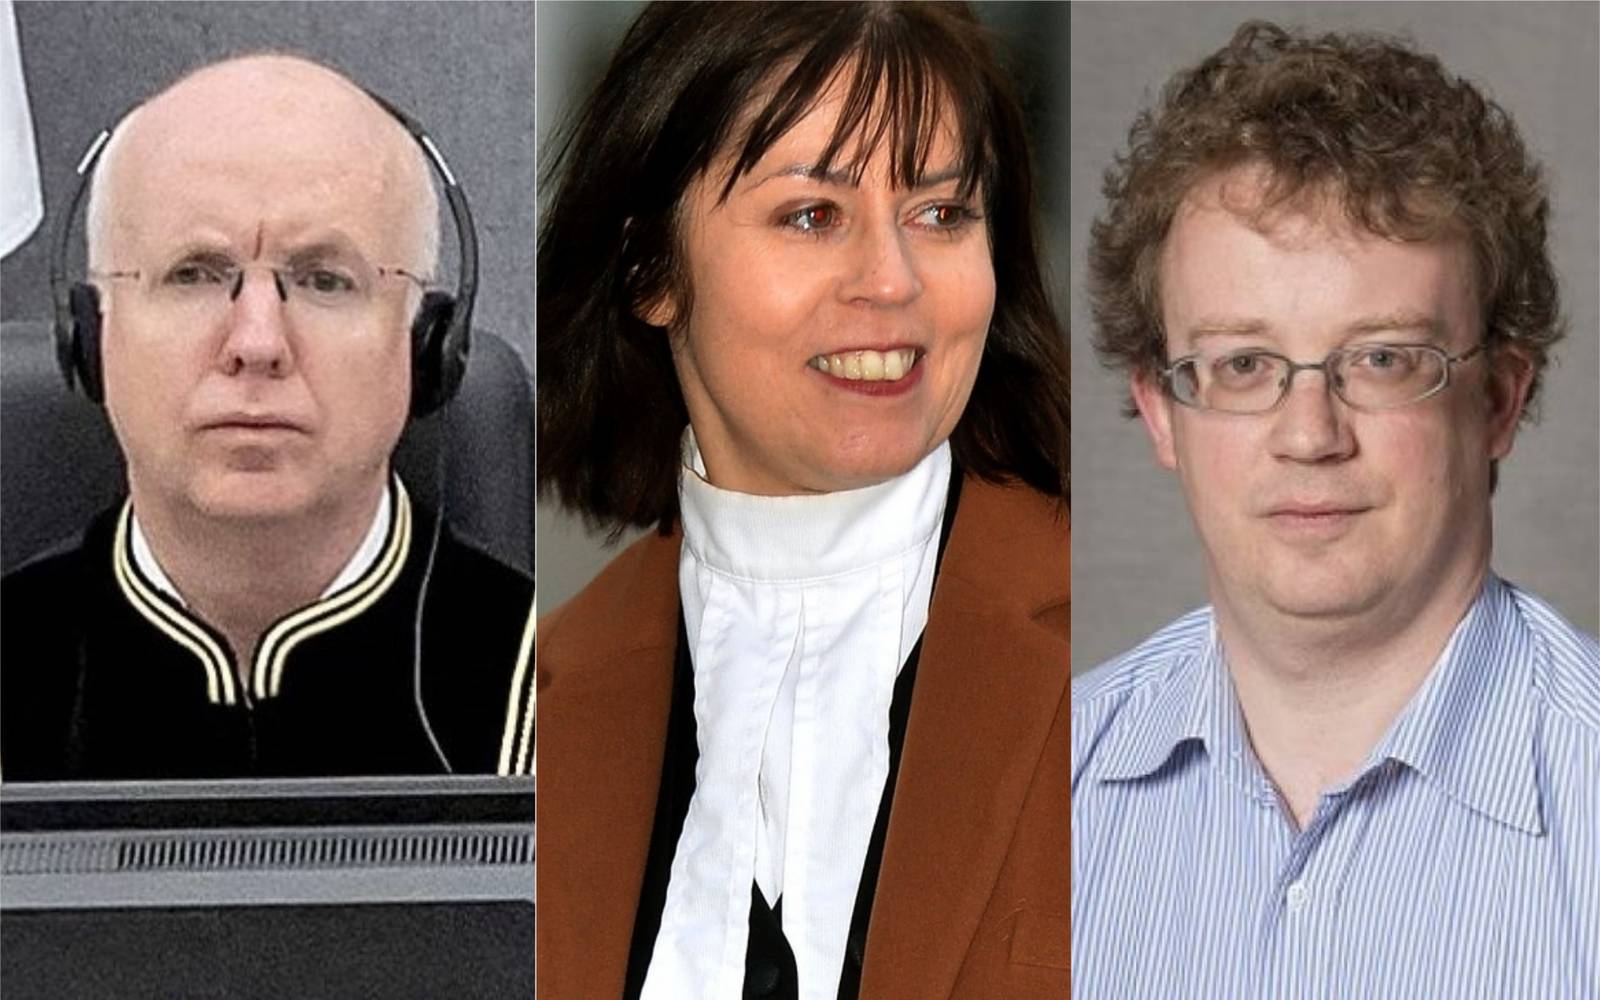 The nominees for Ireland's next judge at the European Court of Human Rights, approved by Government, are Judge Fergal Gaynor, an international judge at Kosovo Specialist Chambers in The Hague, Ms Justice Úna Ní Raifeartaigh, a judge of the Irish Court of Appeal and Prof Colm Ó Cinnéide, professor of Constitutional and Human Rights Law at University College London.